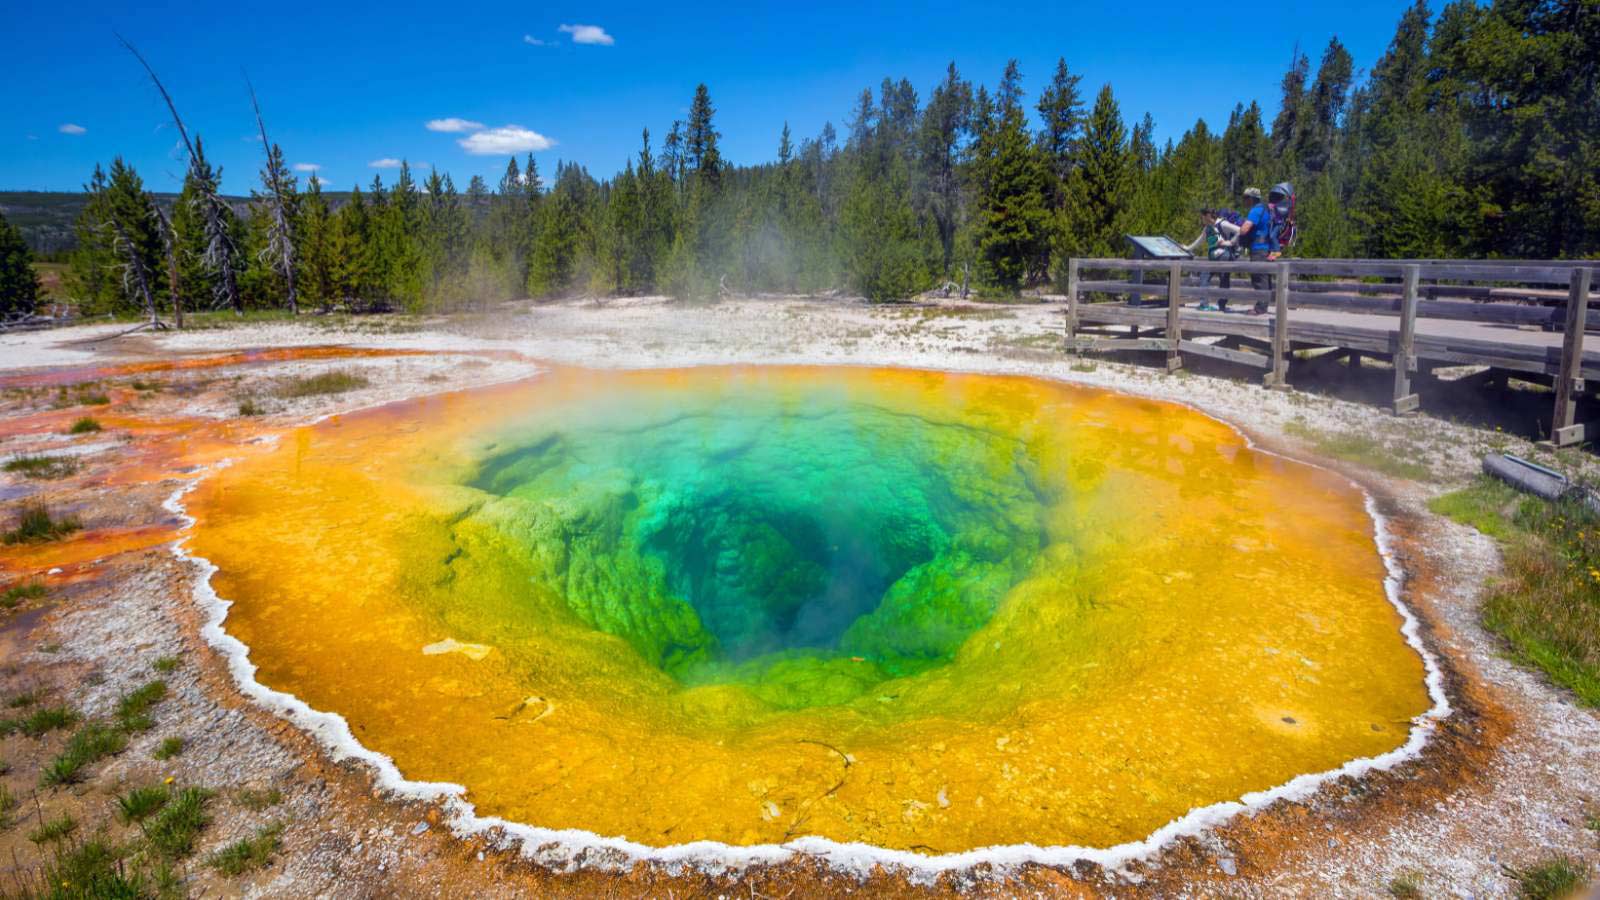 <p>Yellowstone National Park is one of the grandest national parks in the United States. It’s a must-see for anyone visiting the area and is known for its geysers and buffalo.</p>